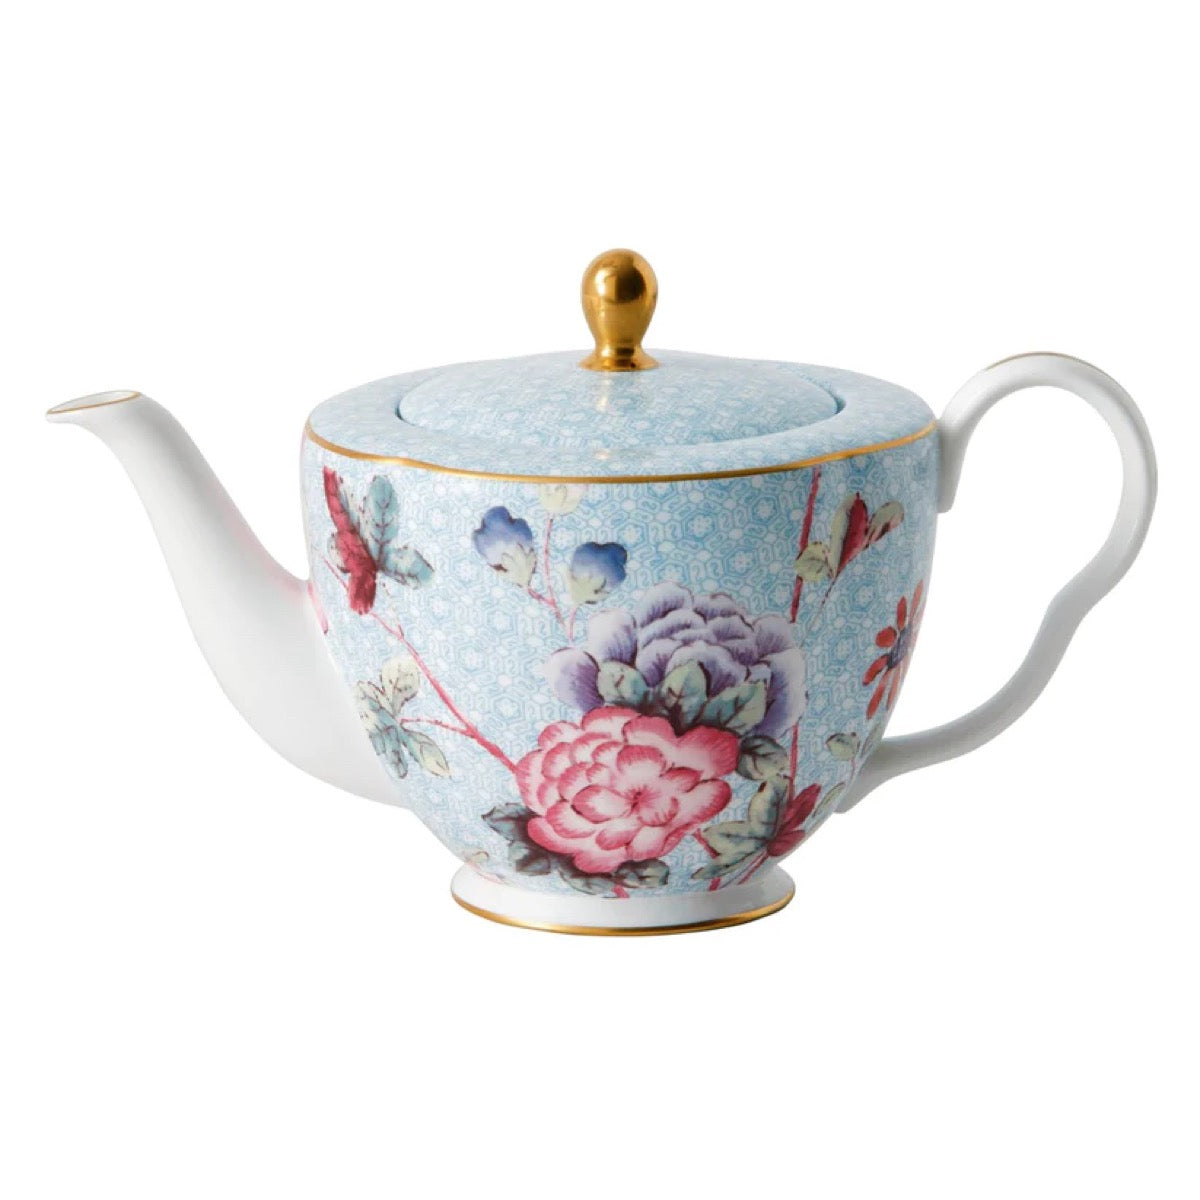 Wedgewood teapot for sale online